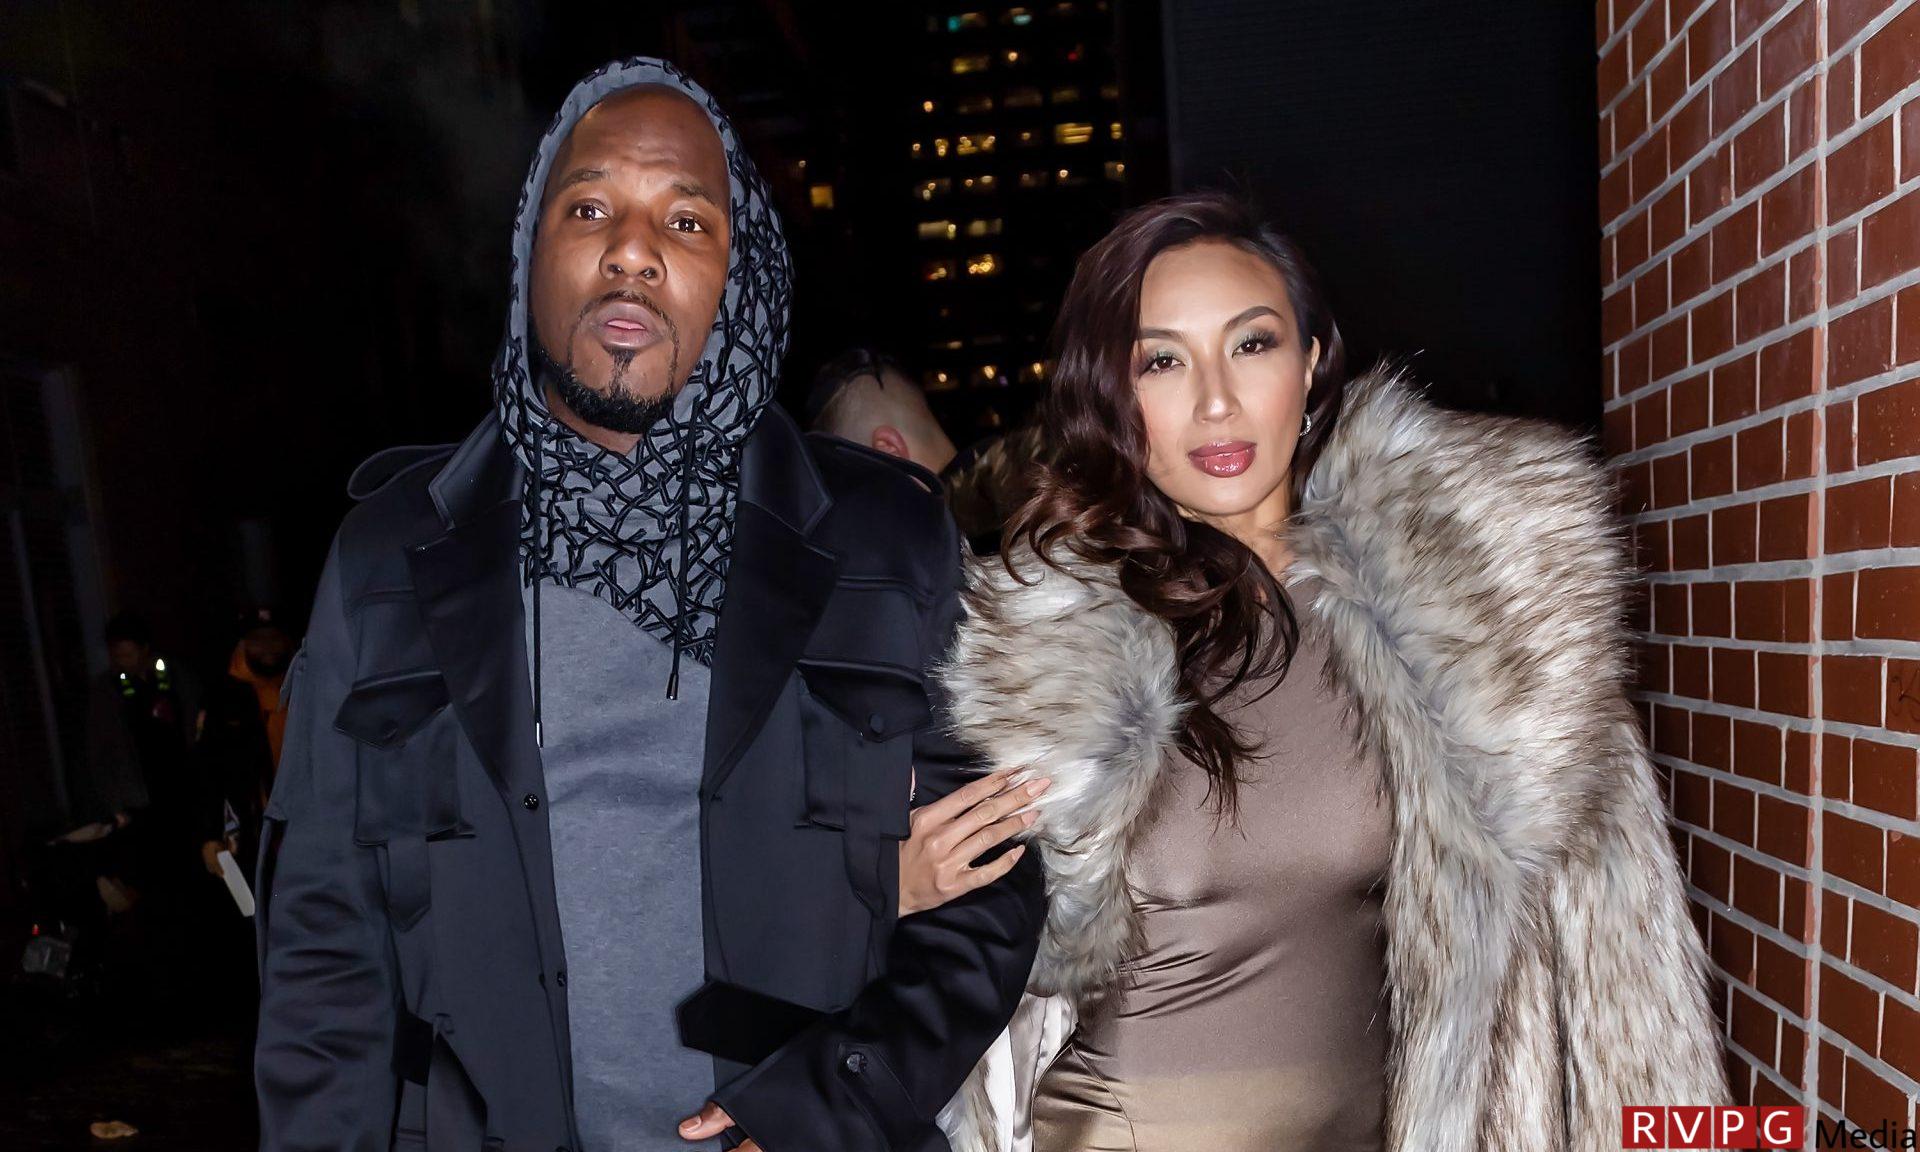 Jeezy appears to be responding to Jeannie Mai's allegations of abuse and child neglect in the ongoing divorce proceedings